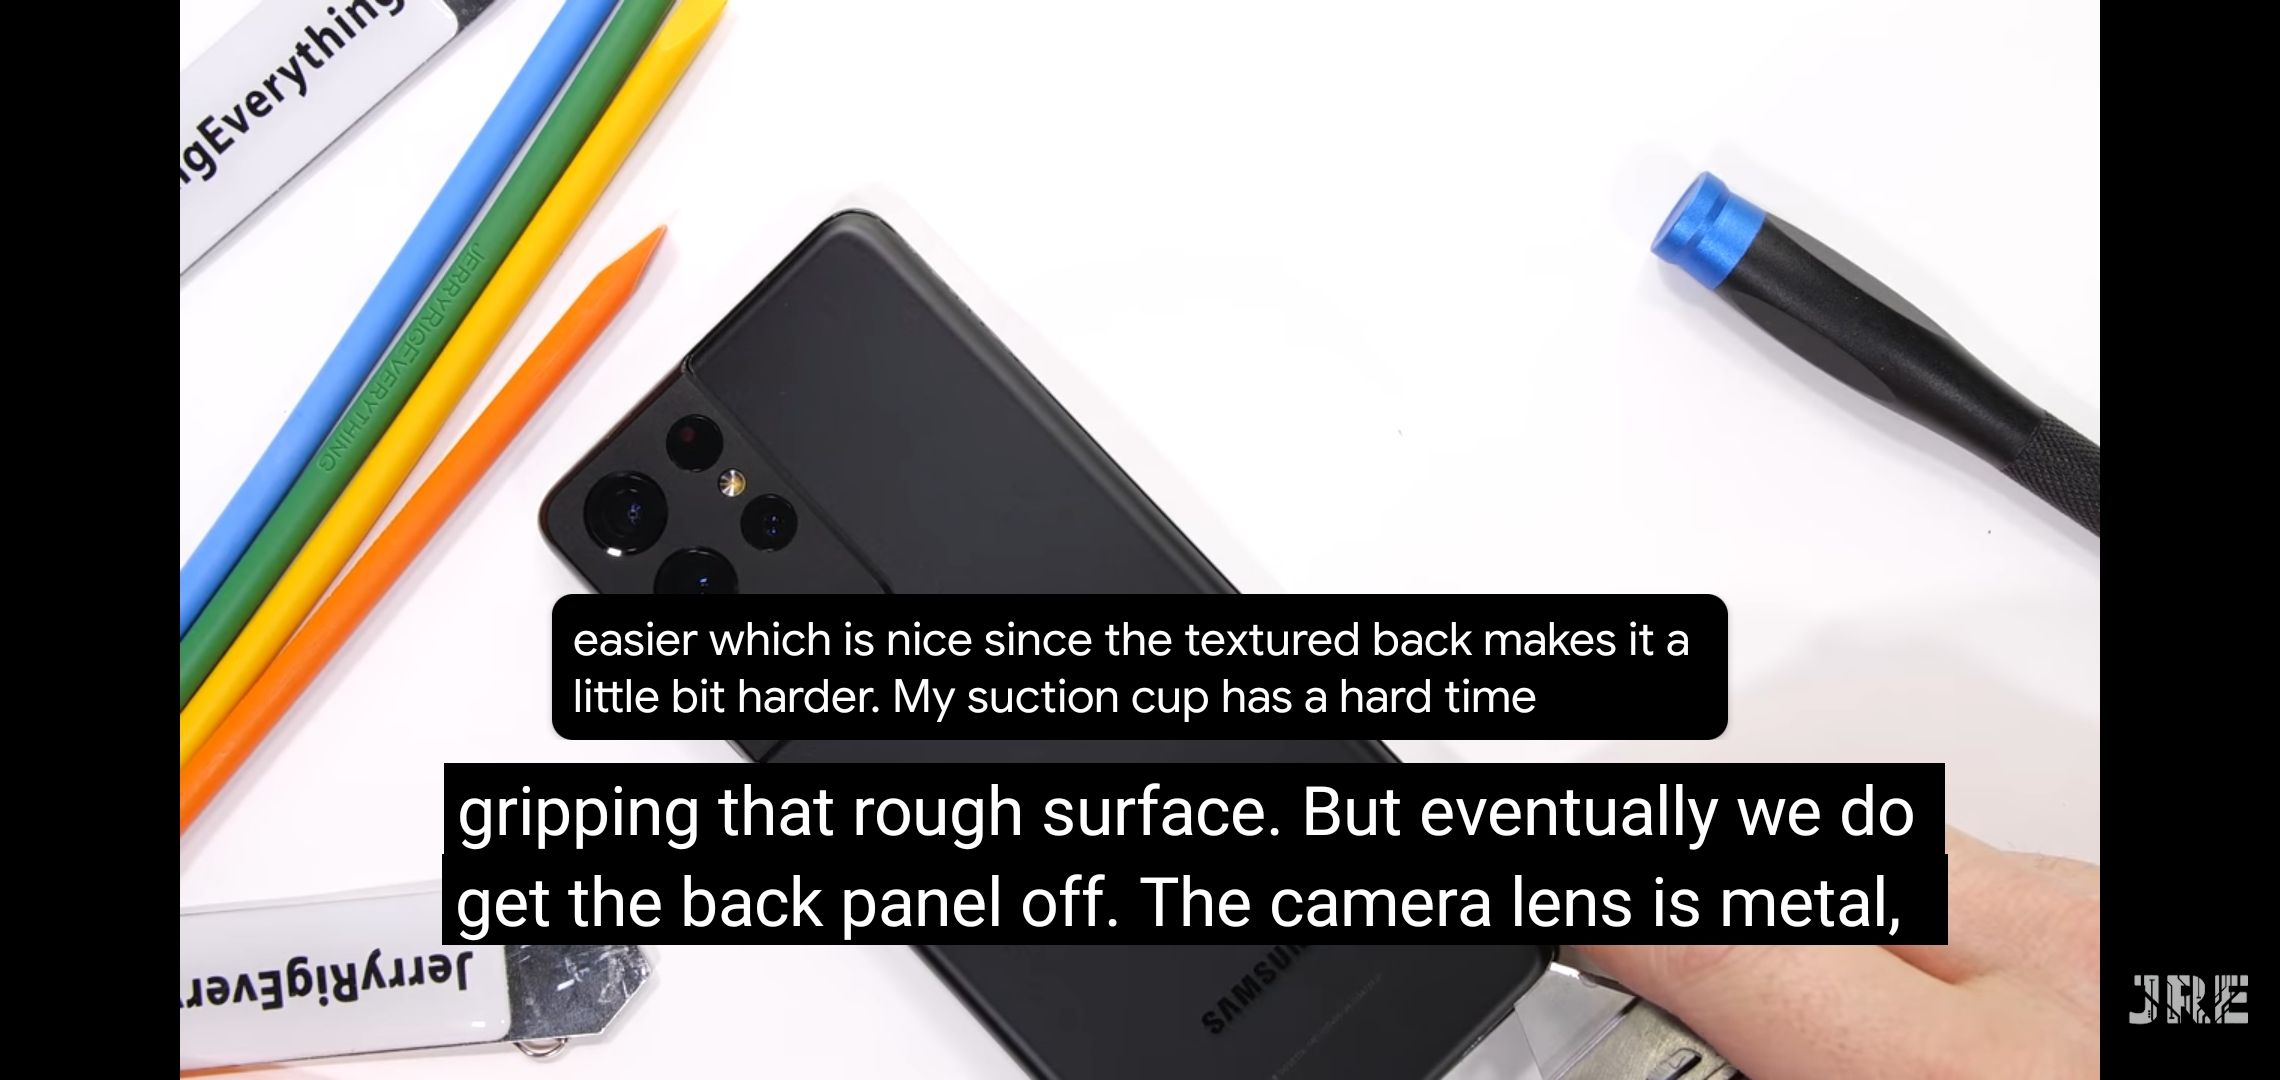 Live captions compared with YouTube's Auto Generated captions with the slow, even voice of Zack Nelson from JerryRigEverything